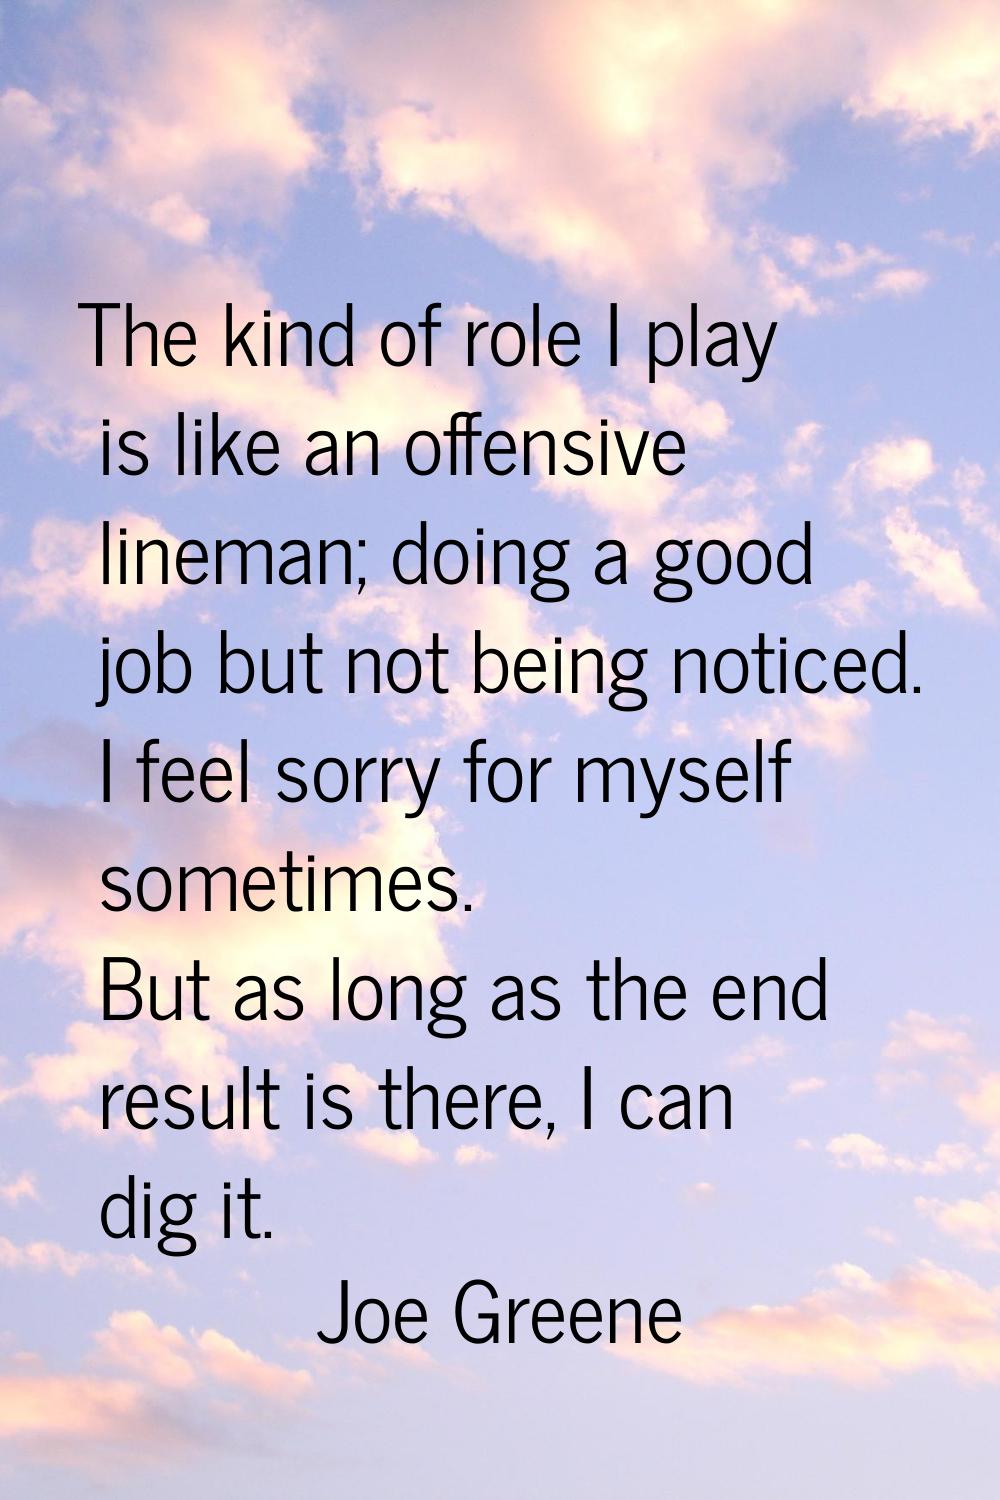 The kind of role I play is like an offensive lineman; doing a good job but not being noticed. I fee